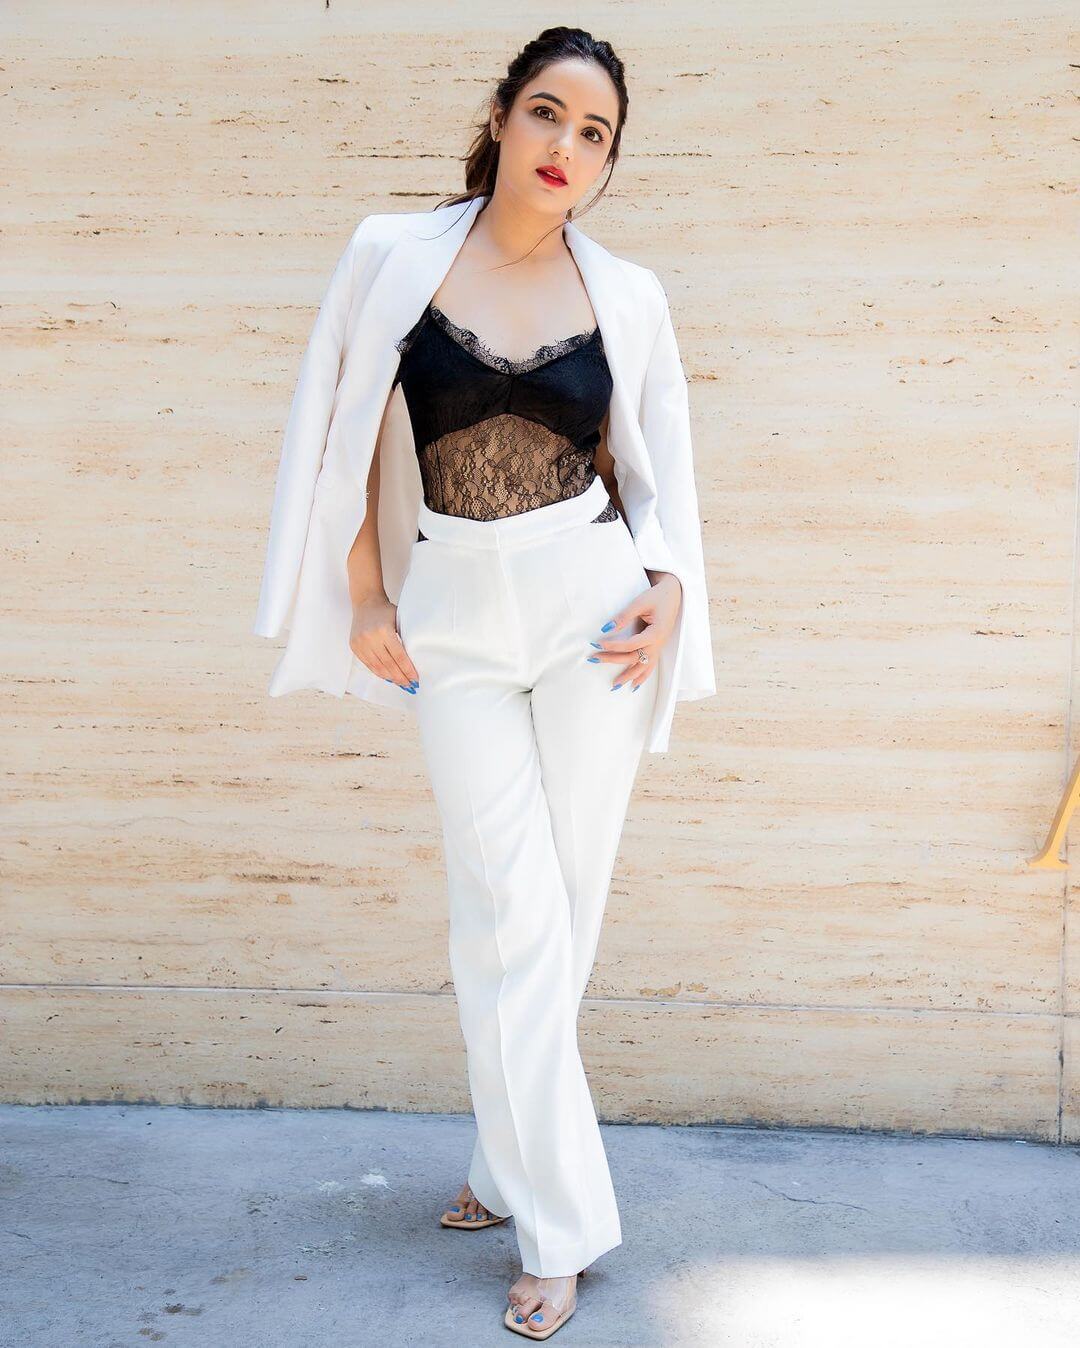 Jasmin Bhasin Gives Uber Cool Vibes In White Monochrome Blazer Pants With Black Lace Top